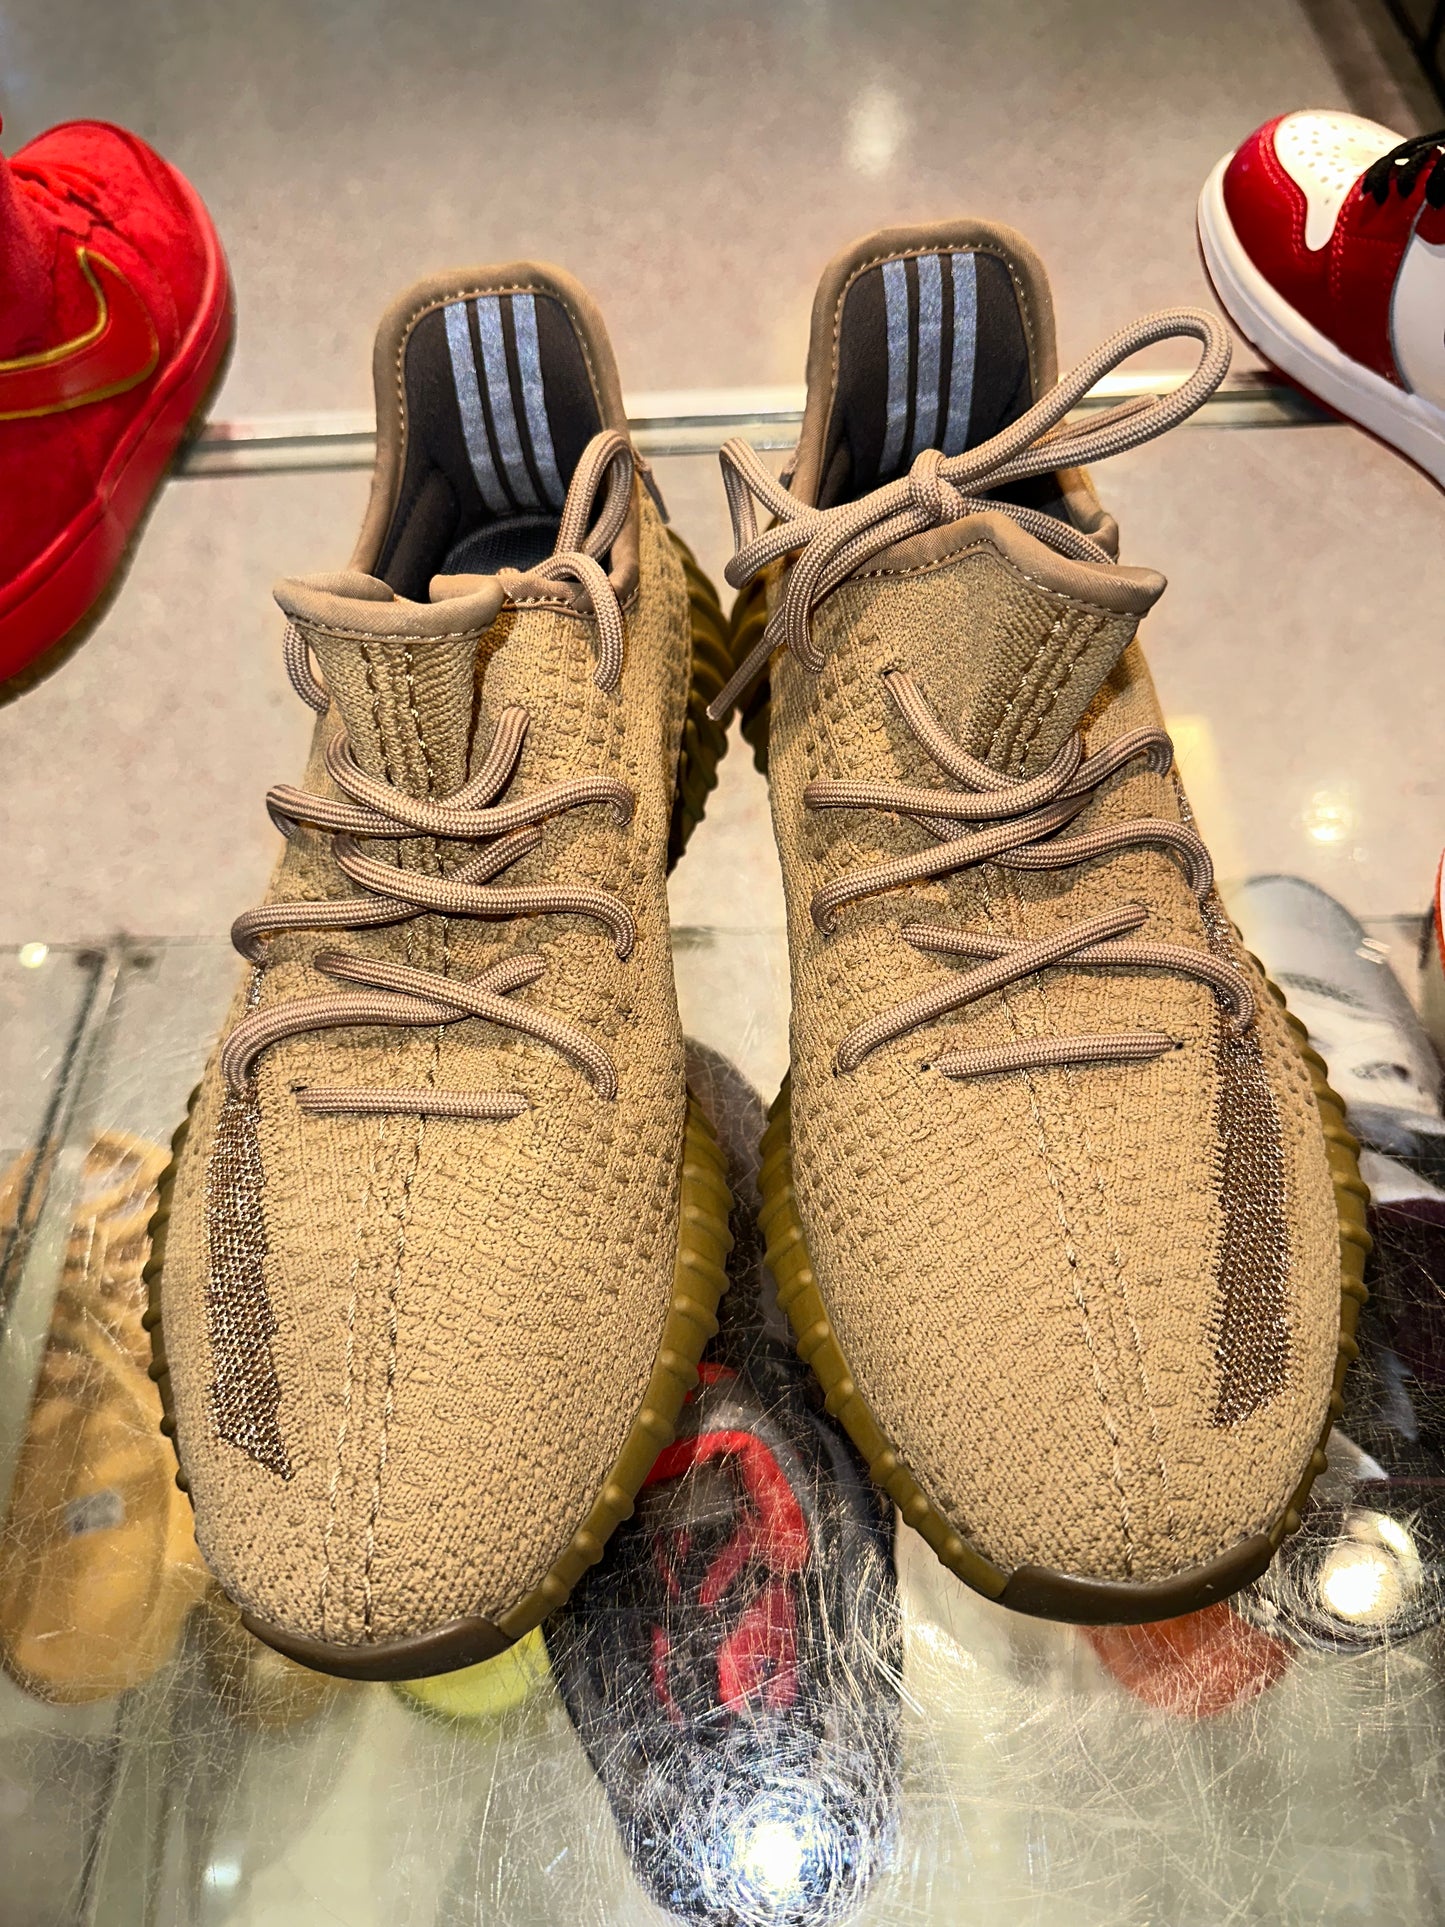 Size 8.5 Adidas Yeezy Boost 350 v2 “Earth” (Mall)